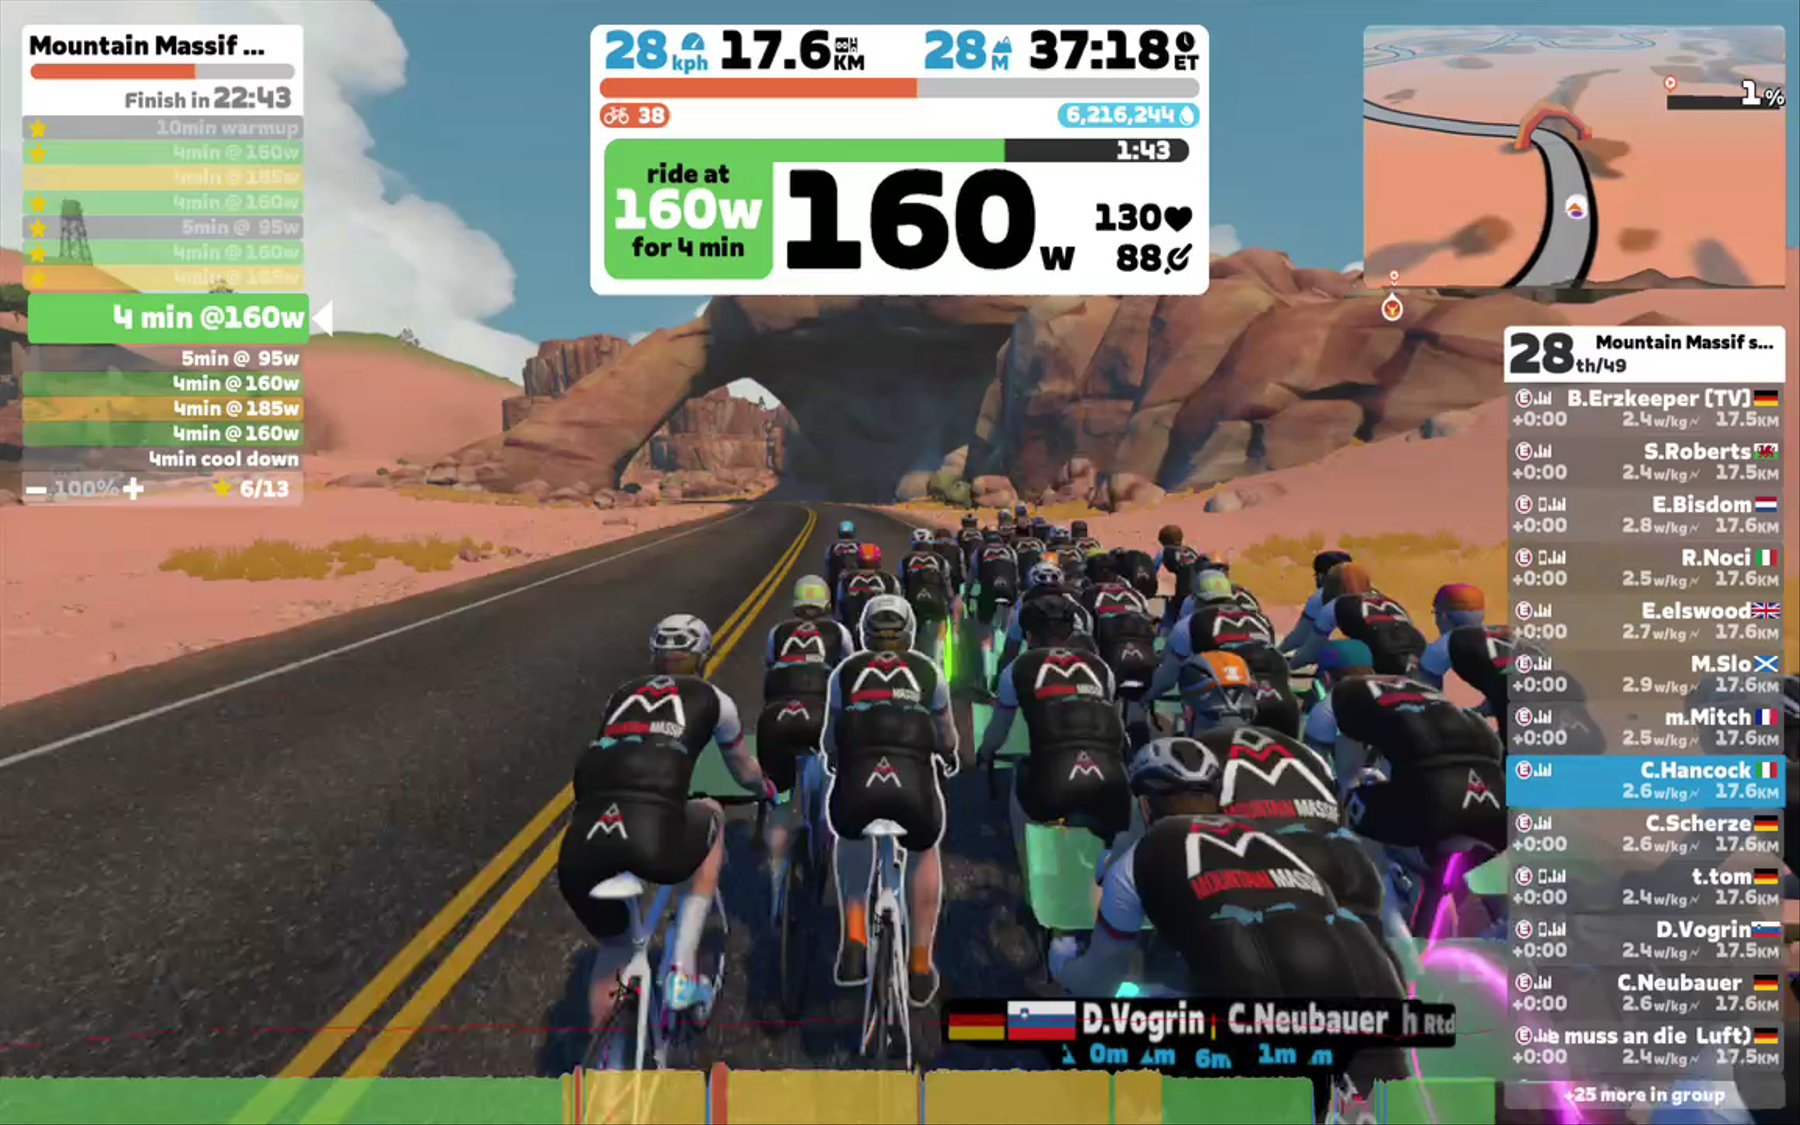 Zwift - Group Workout: Mountain Massif structured training - Threshold Sandwich (E) on Tempus Fugit in Watopia